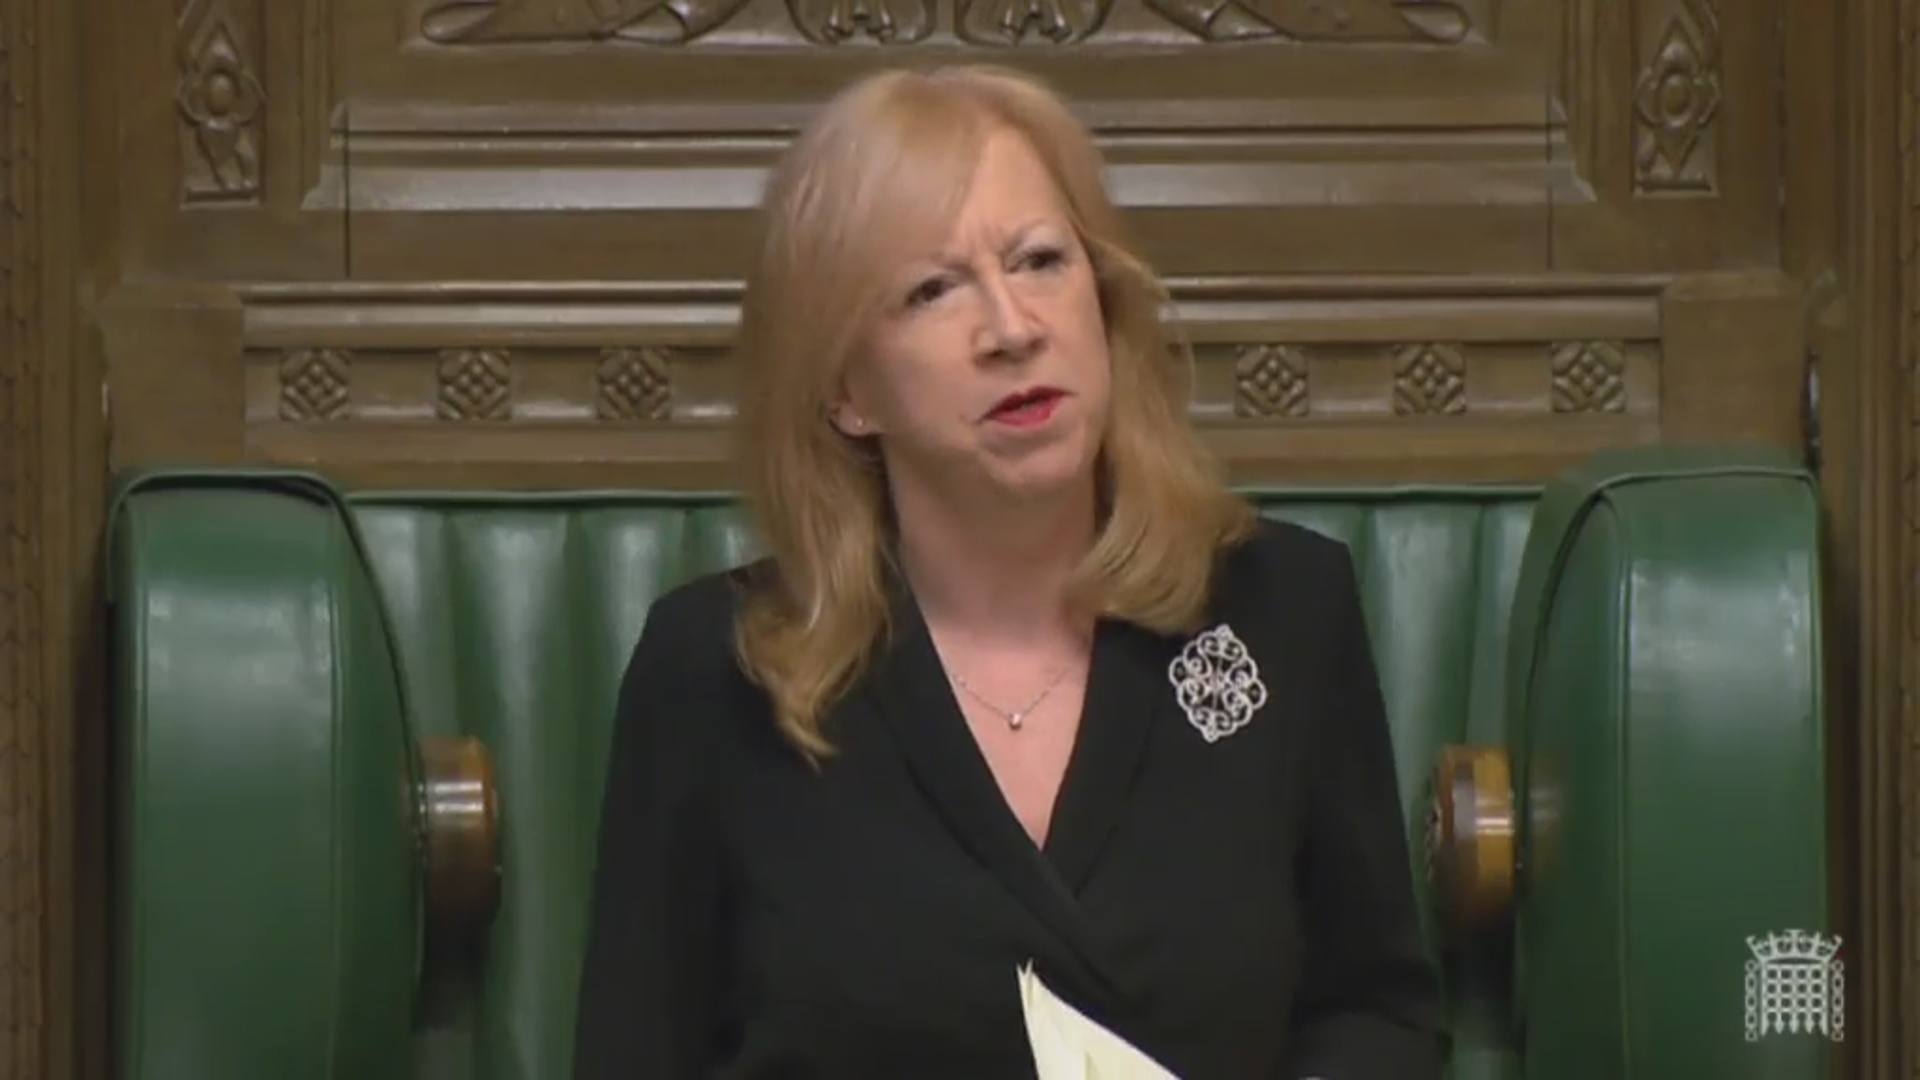 The Deputy Speaker of the House of Commons in the UK, Eleanor Laing 